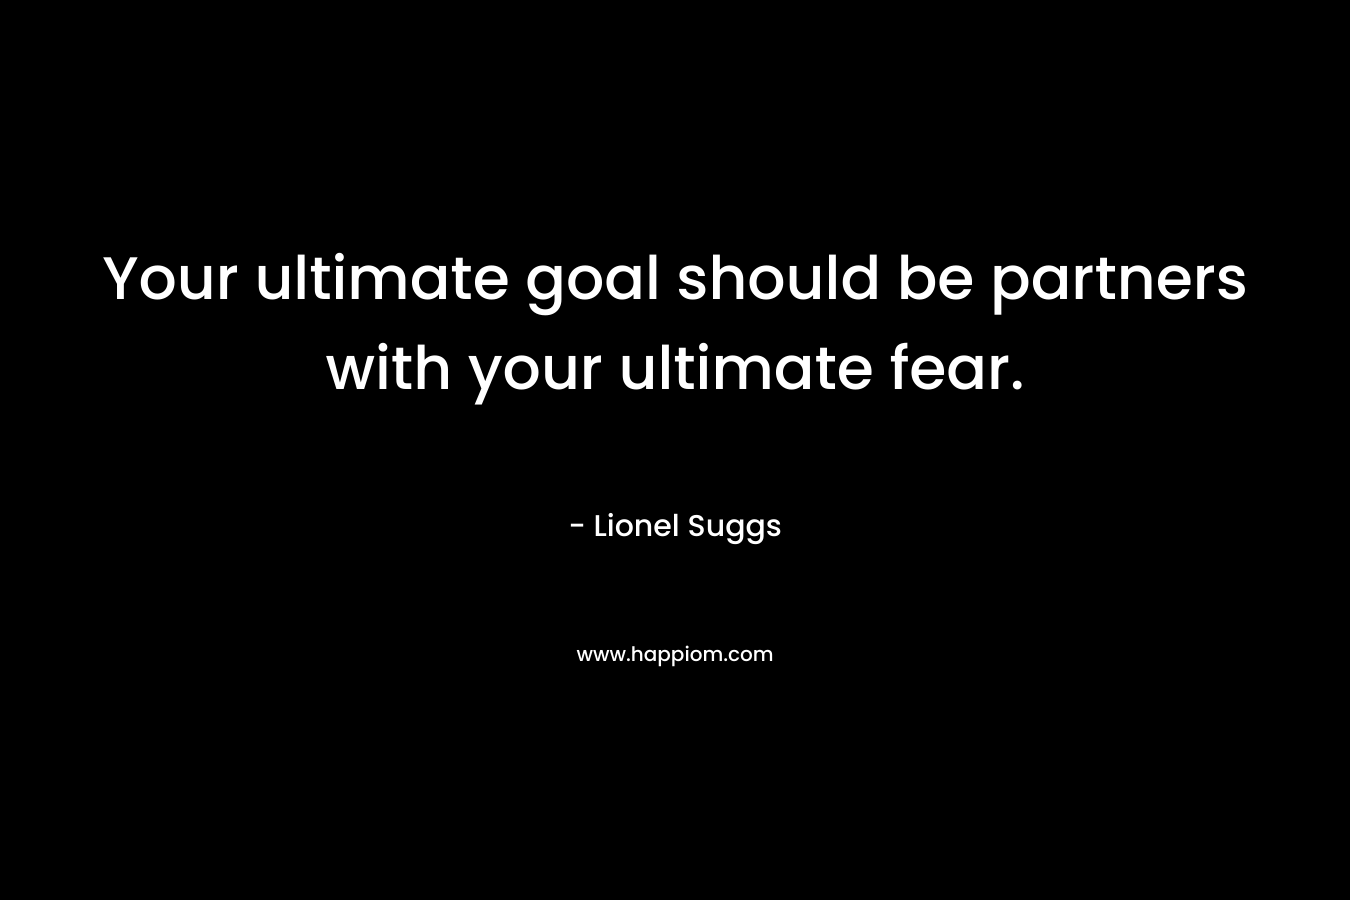 Your ultimate goal should be partners with your ultimate fear. – Lionel Suggs